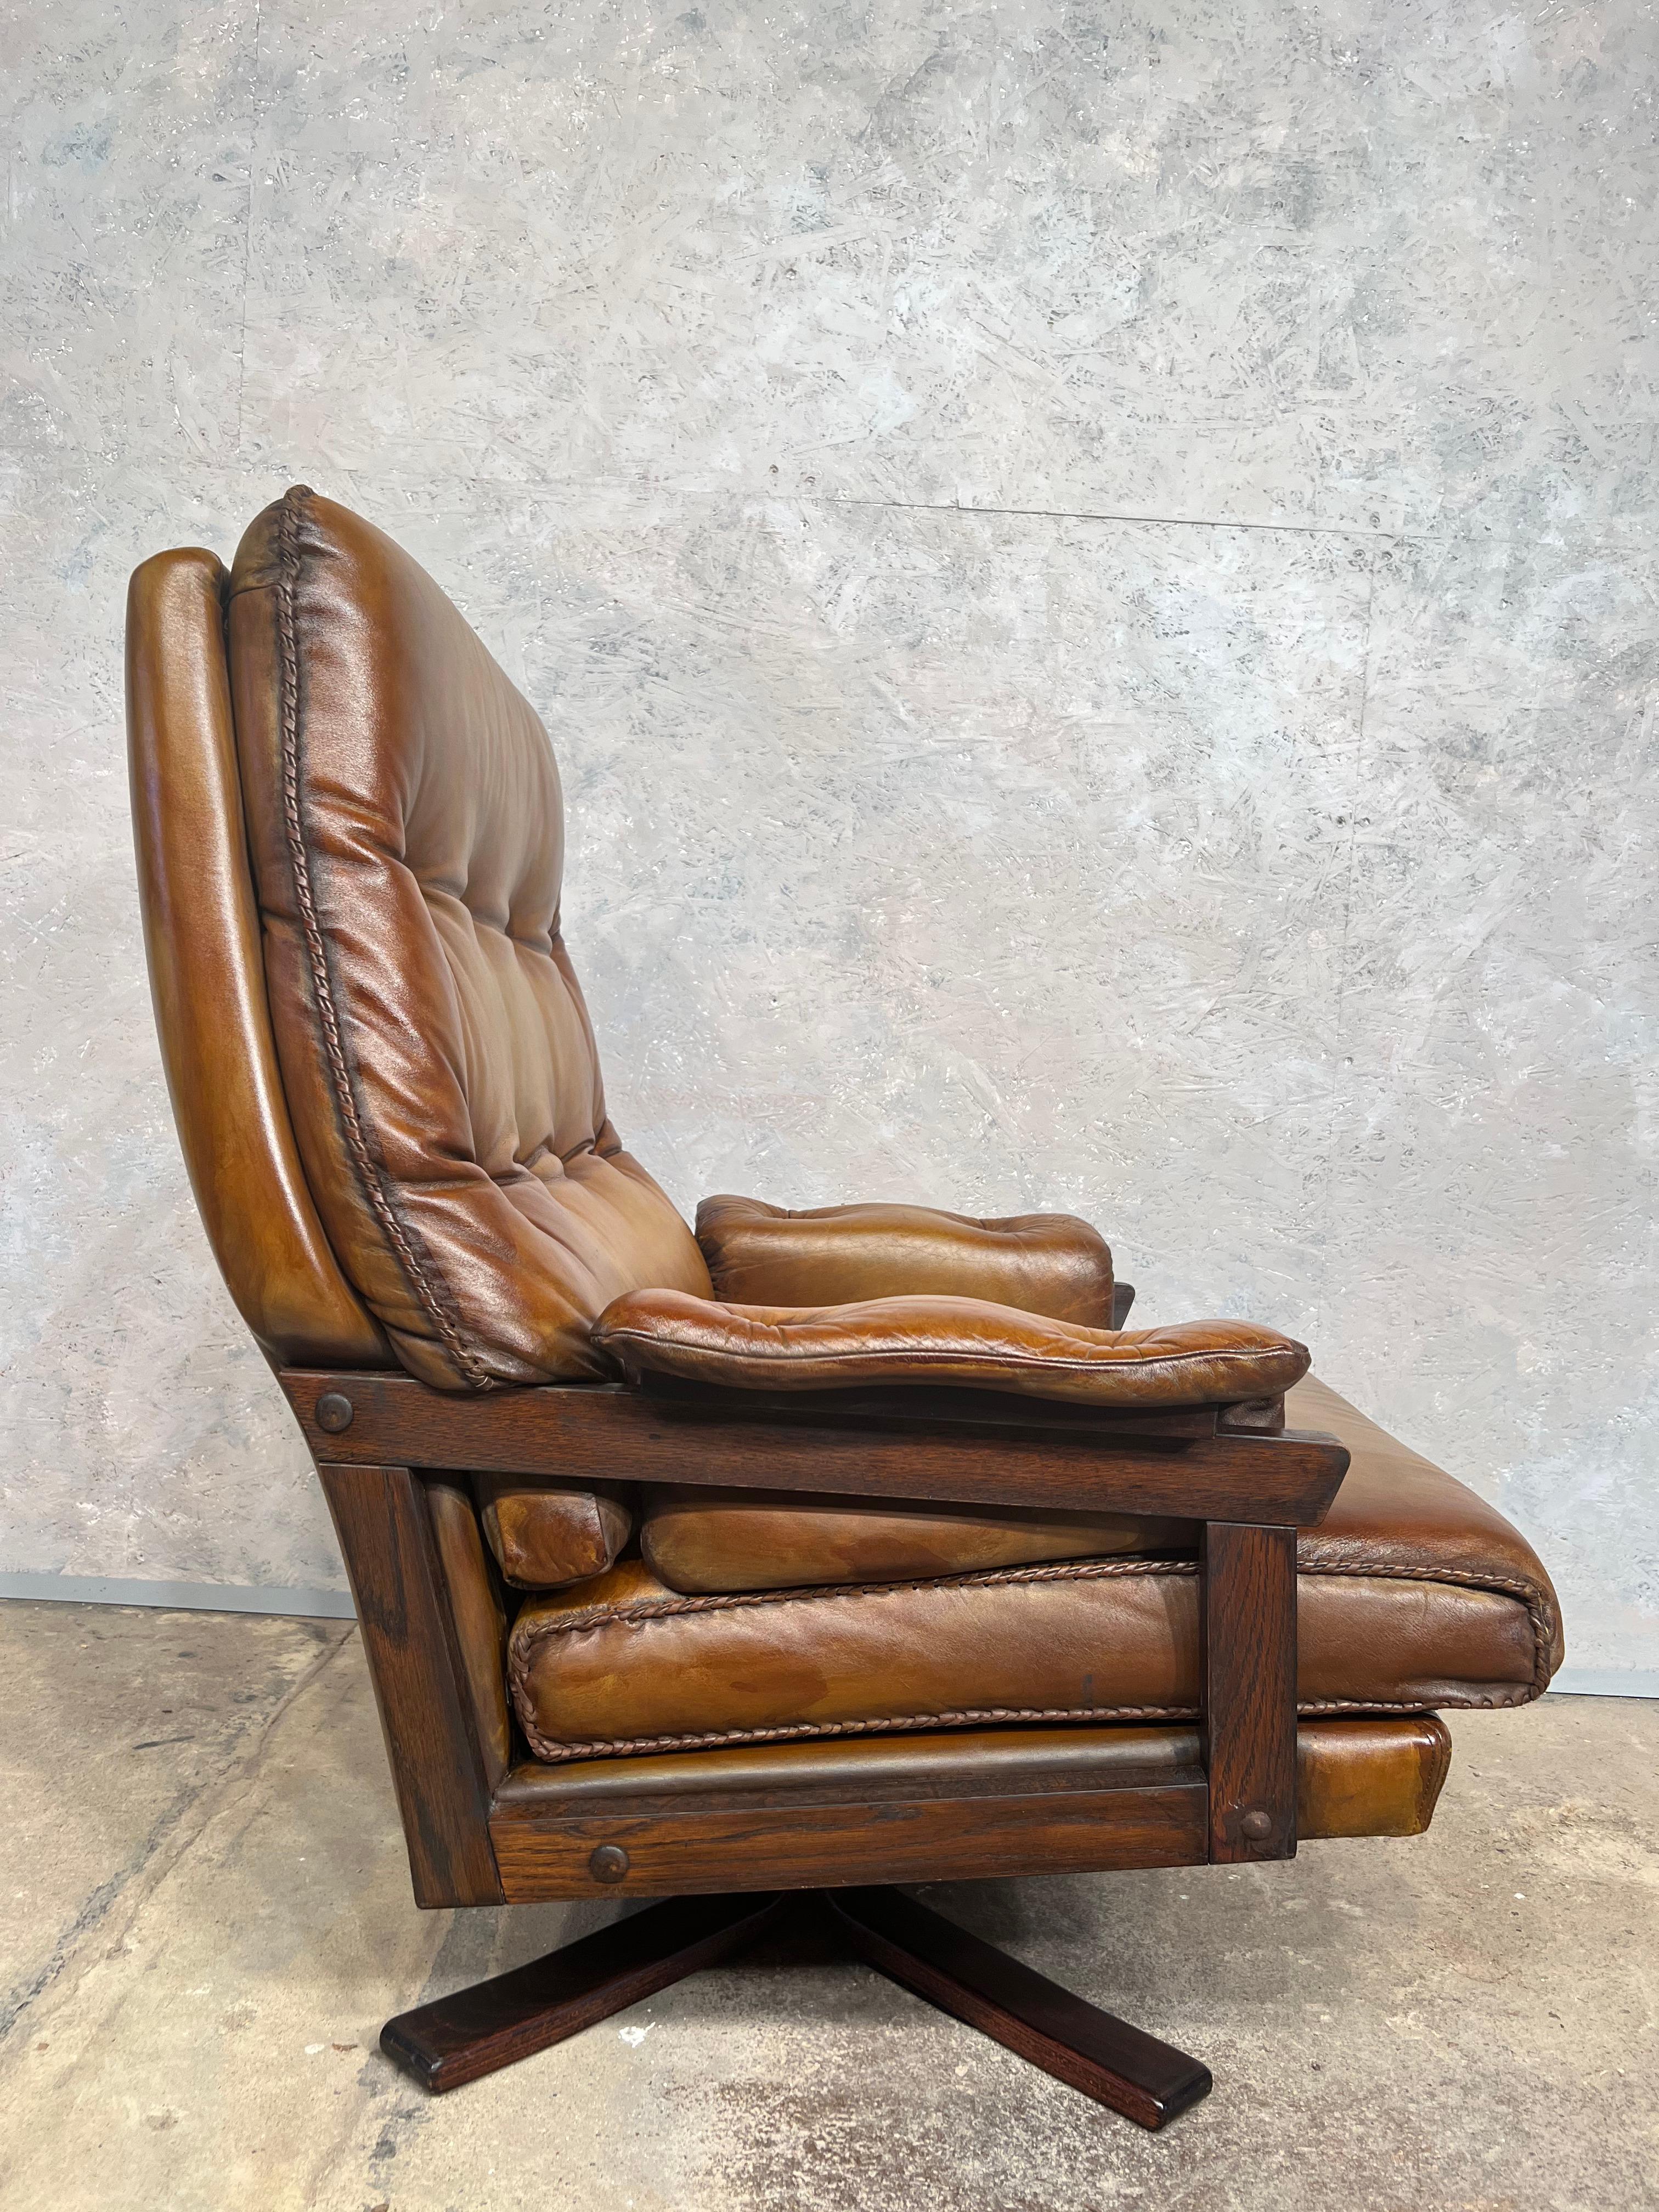 Vintage Arne Norell Leather Swivel Chair Hand dyed Tan #460 For Sale 2